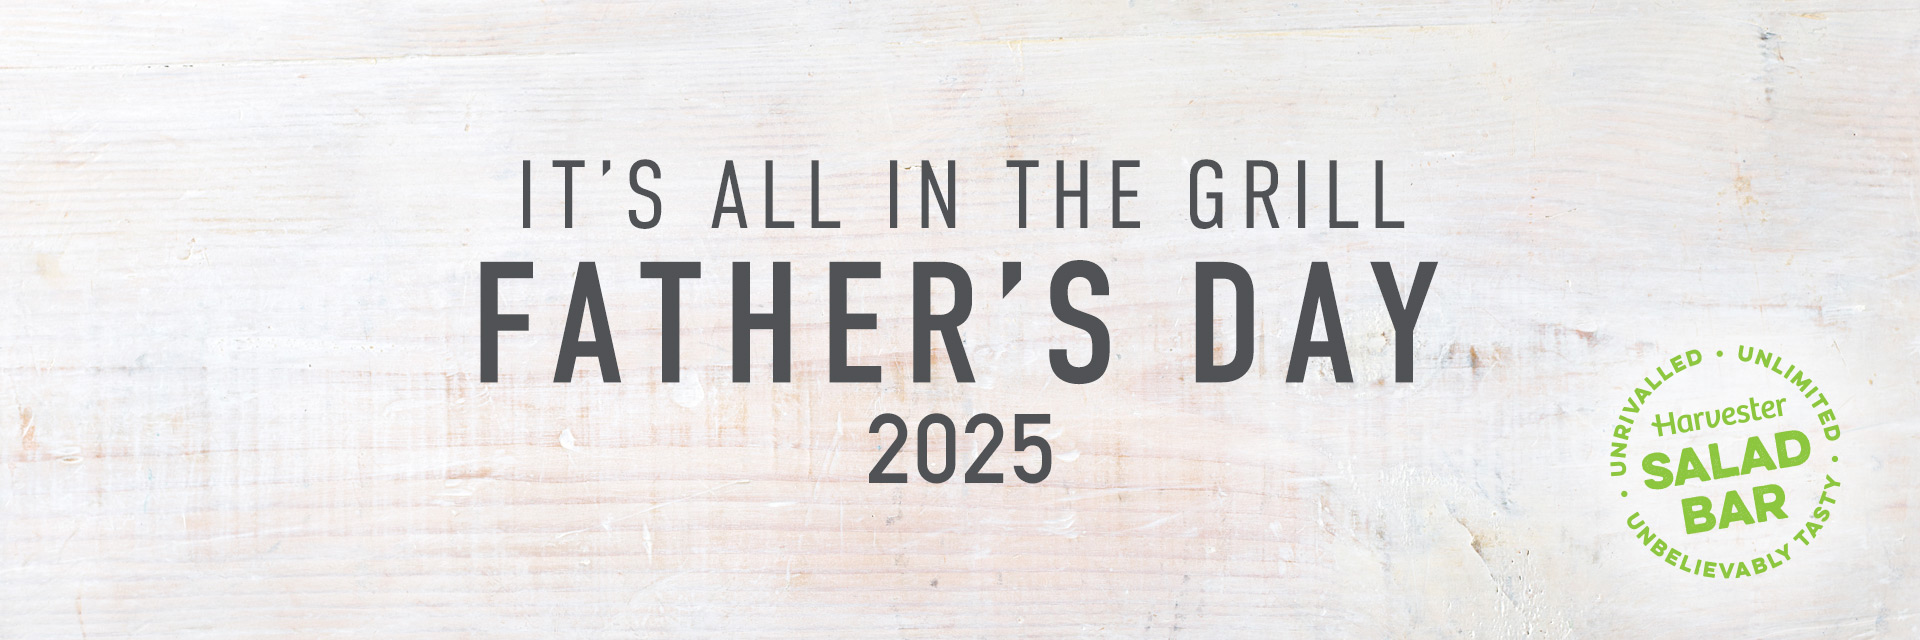 Father’s Day at Harvester Atherleigh